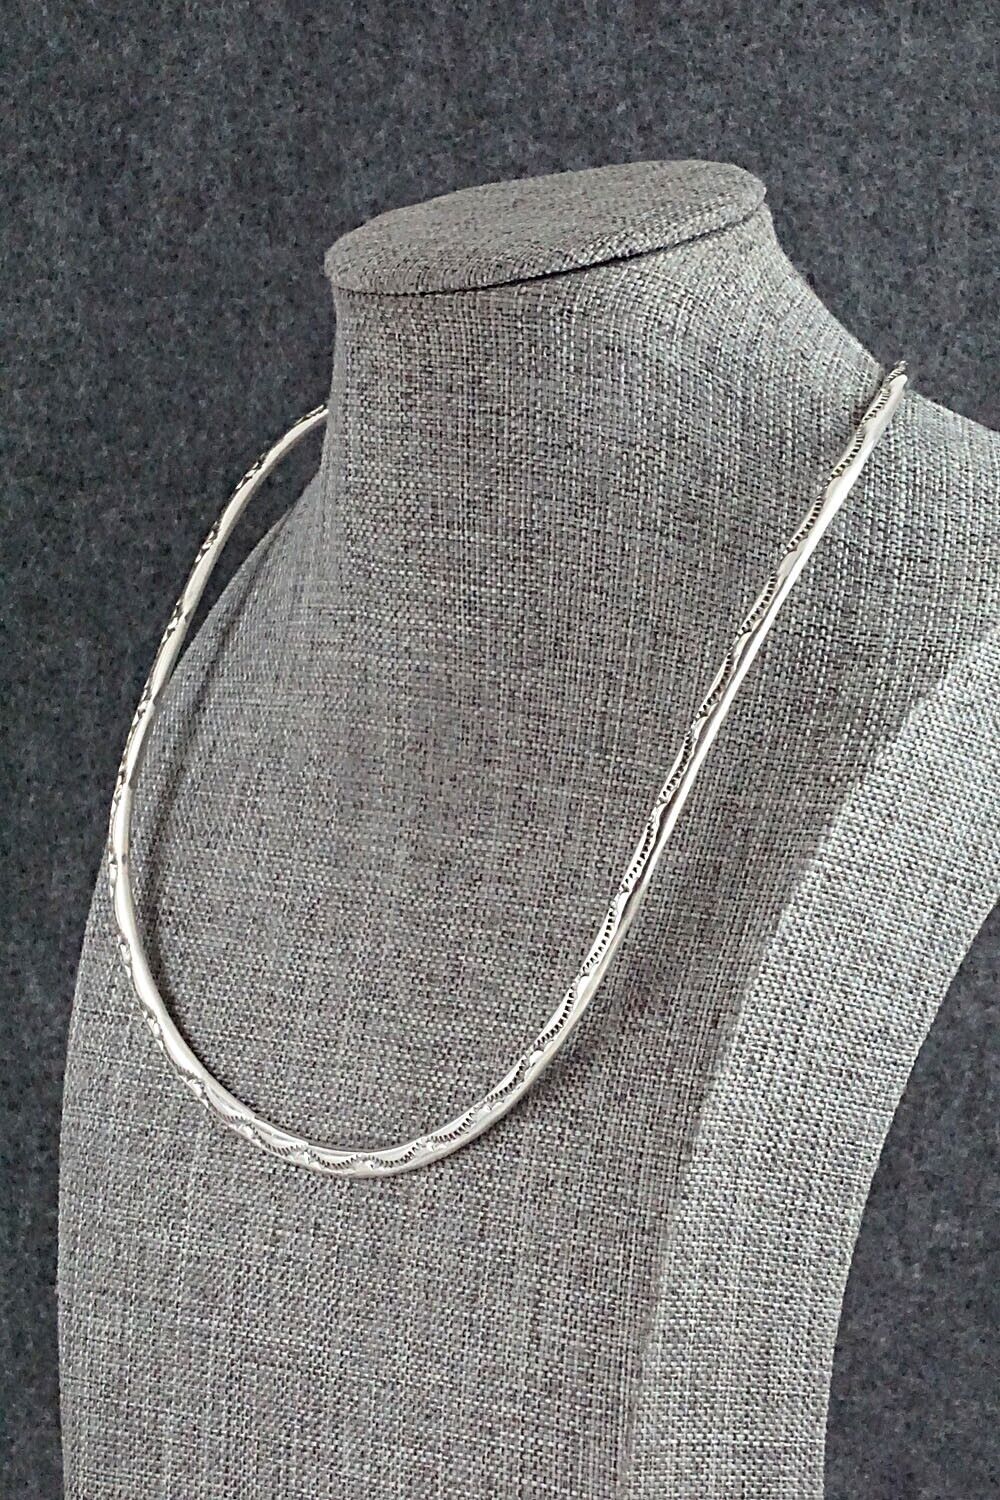 Sterling Silver Choker Necklace - Elaine Tahe